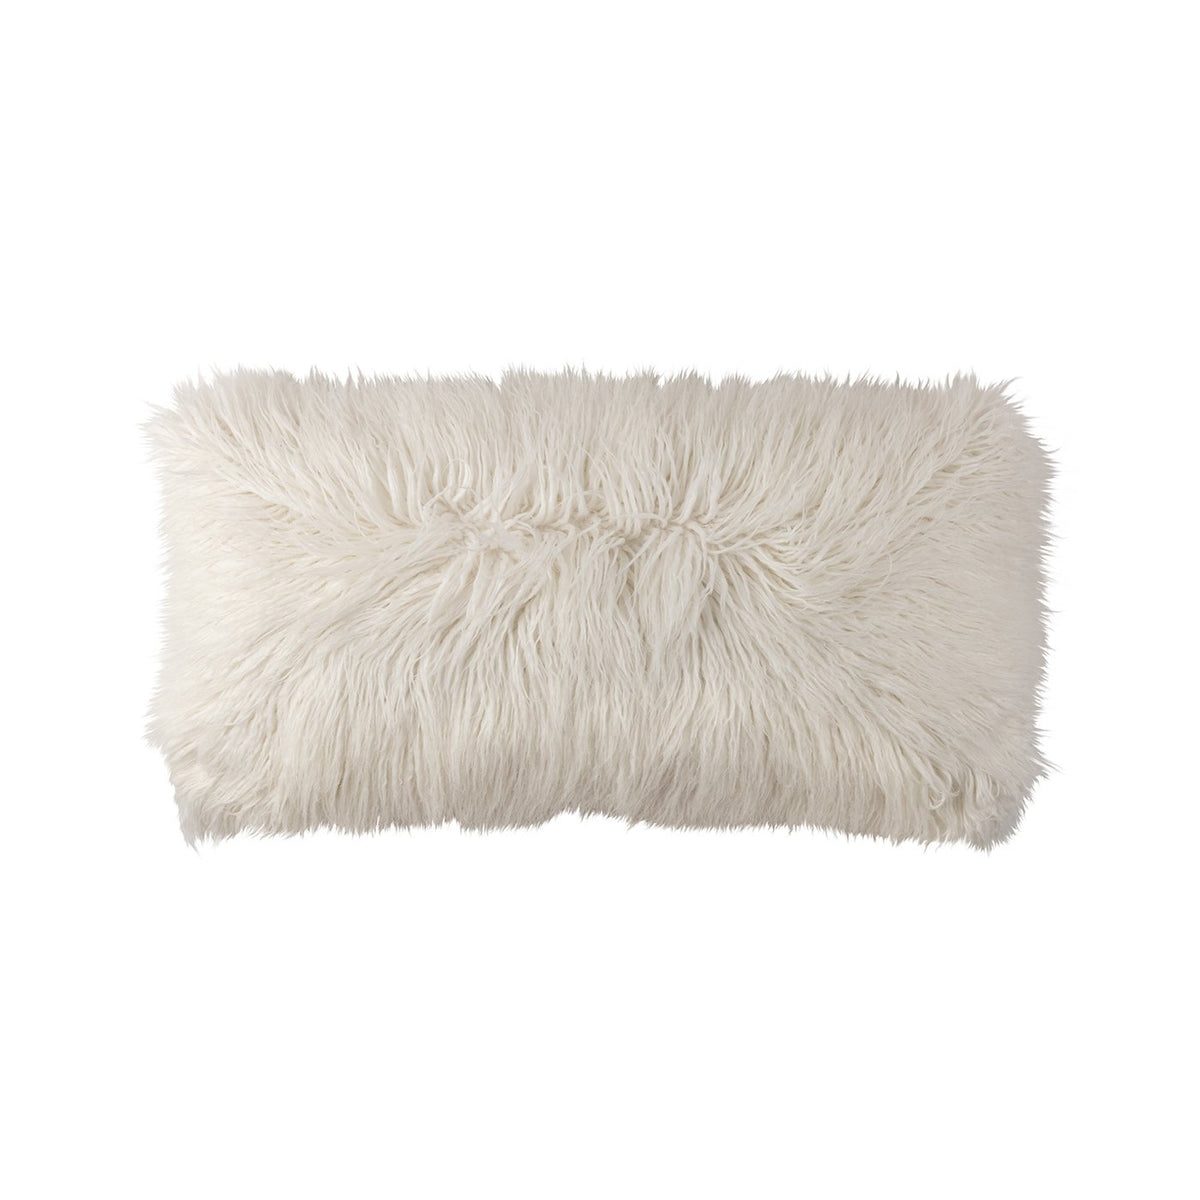 Coco Large White Faux Fur Pillow by Lili Alessandra | Fig linens